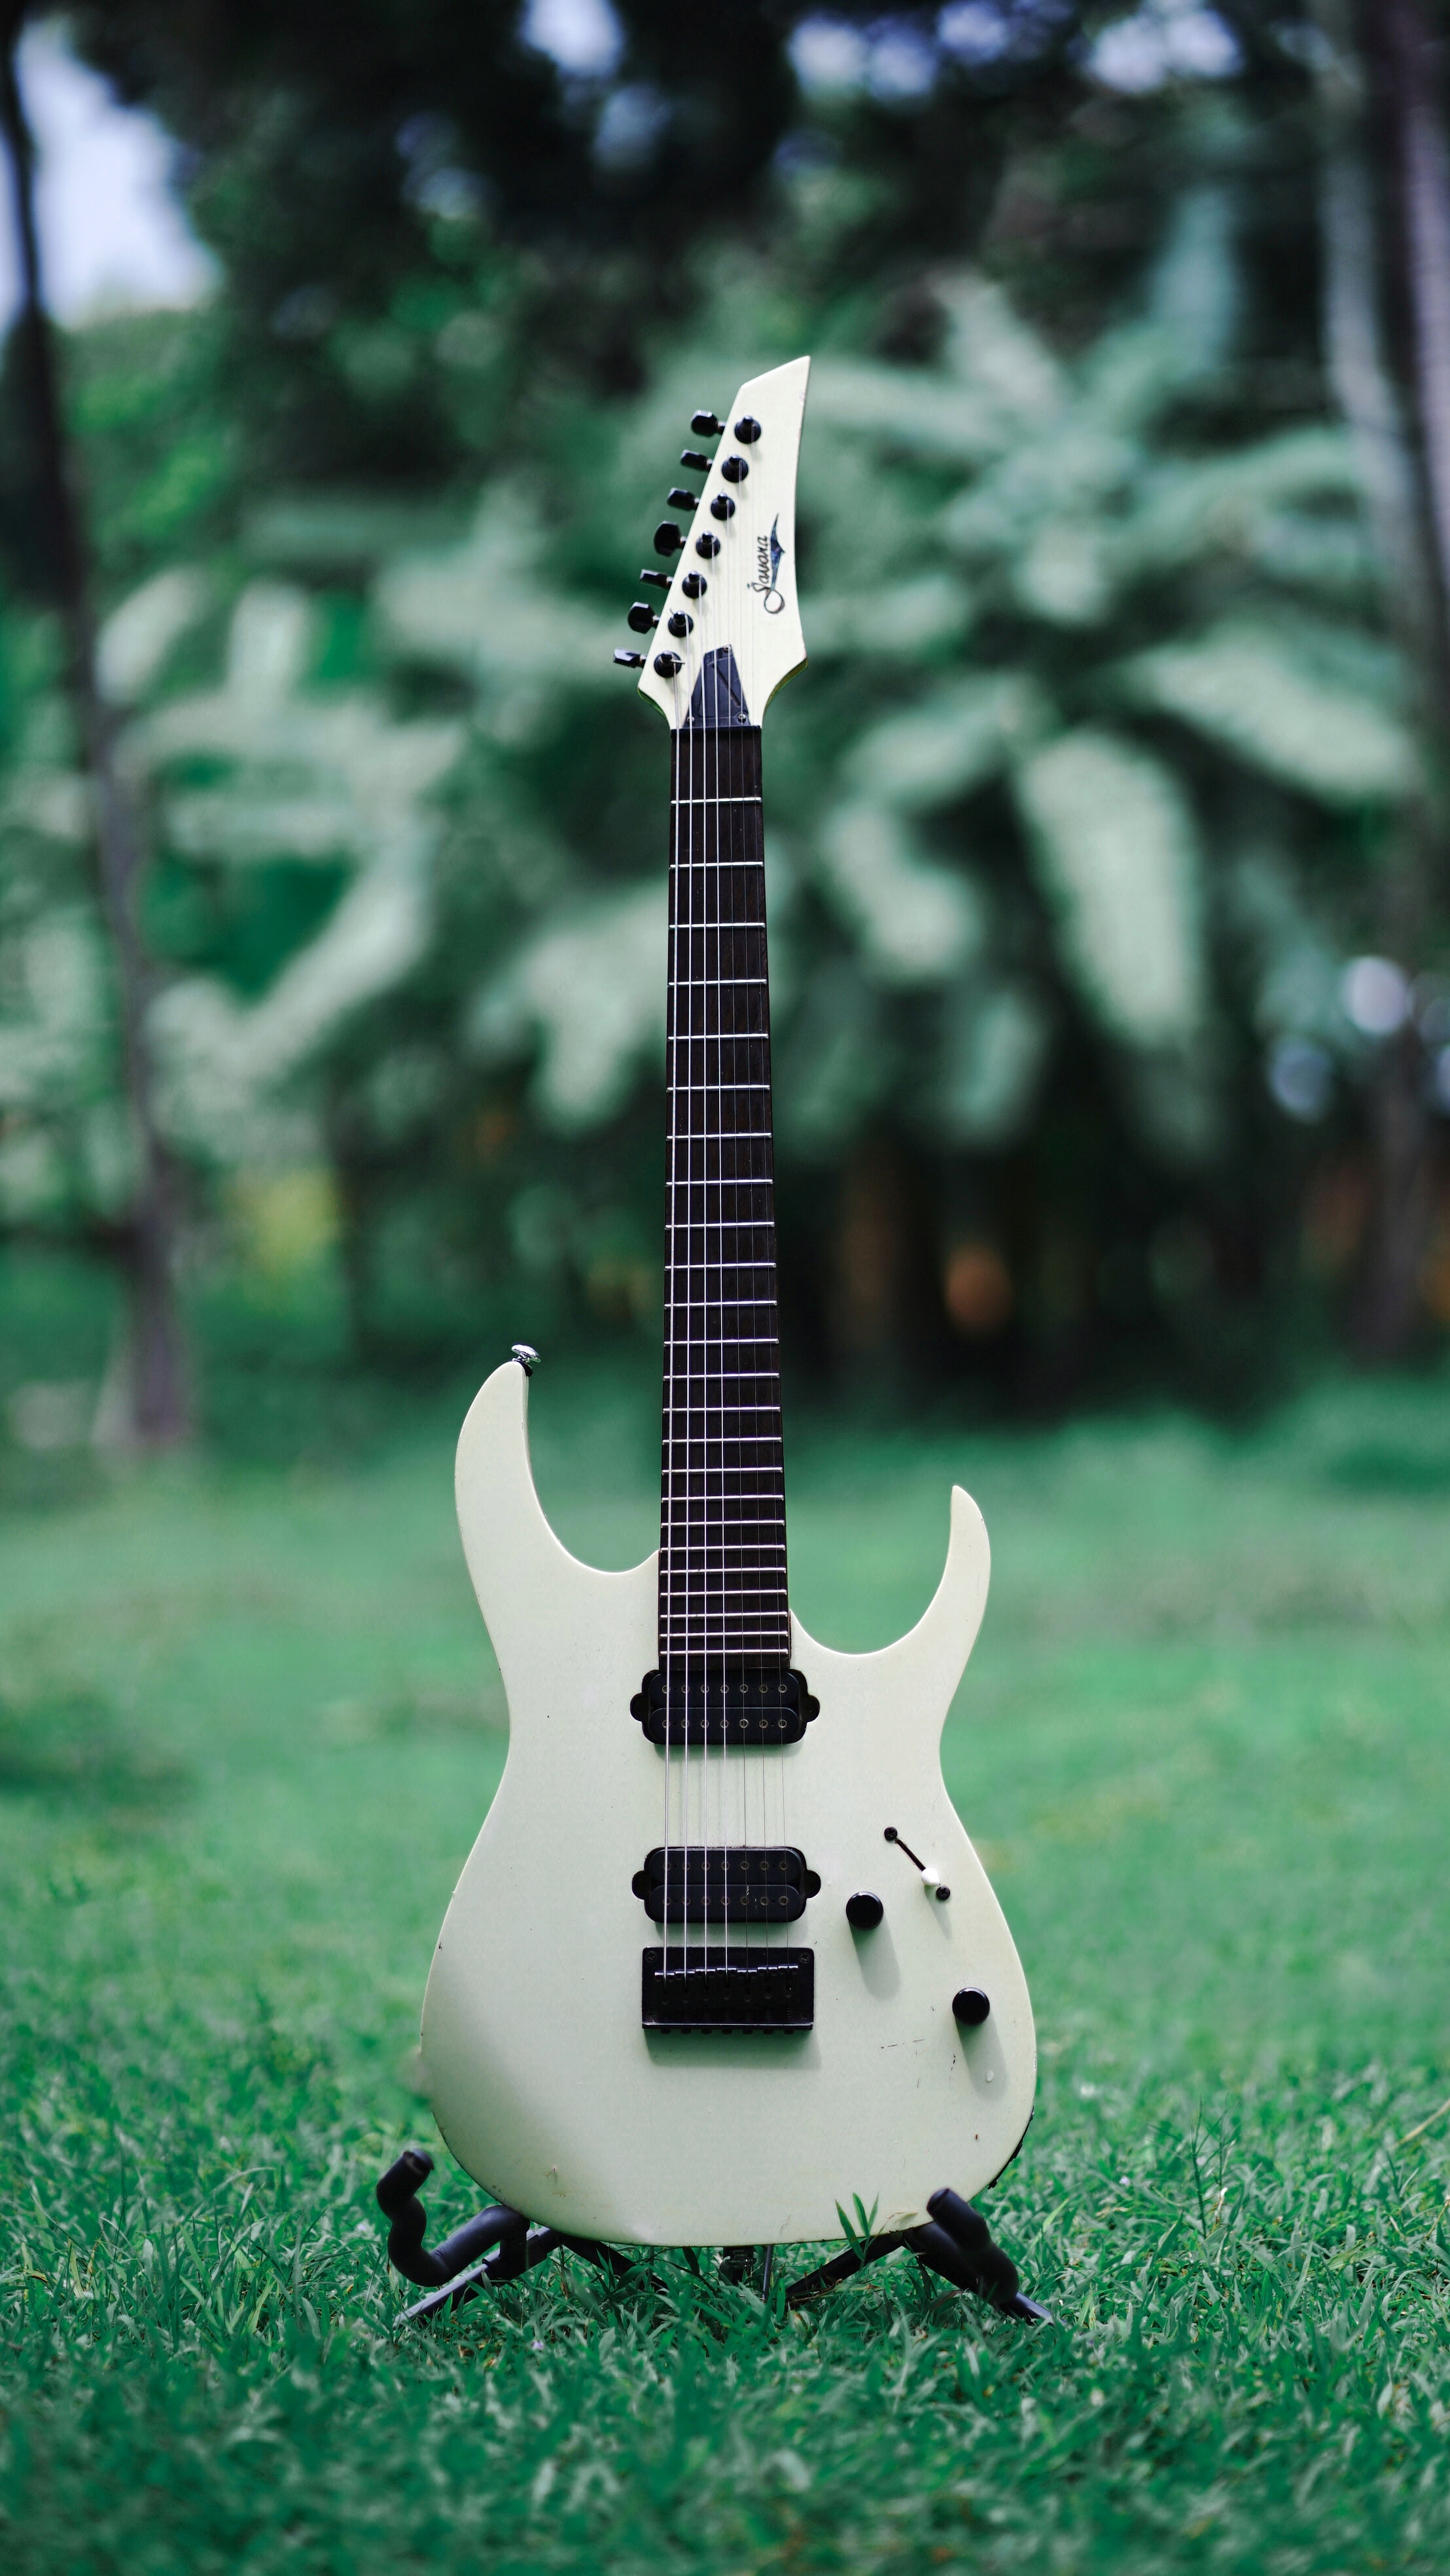 guitar, electric guitar, musical instrument, music, grass, white images